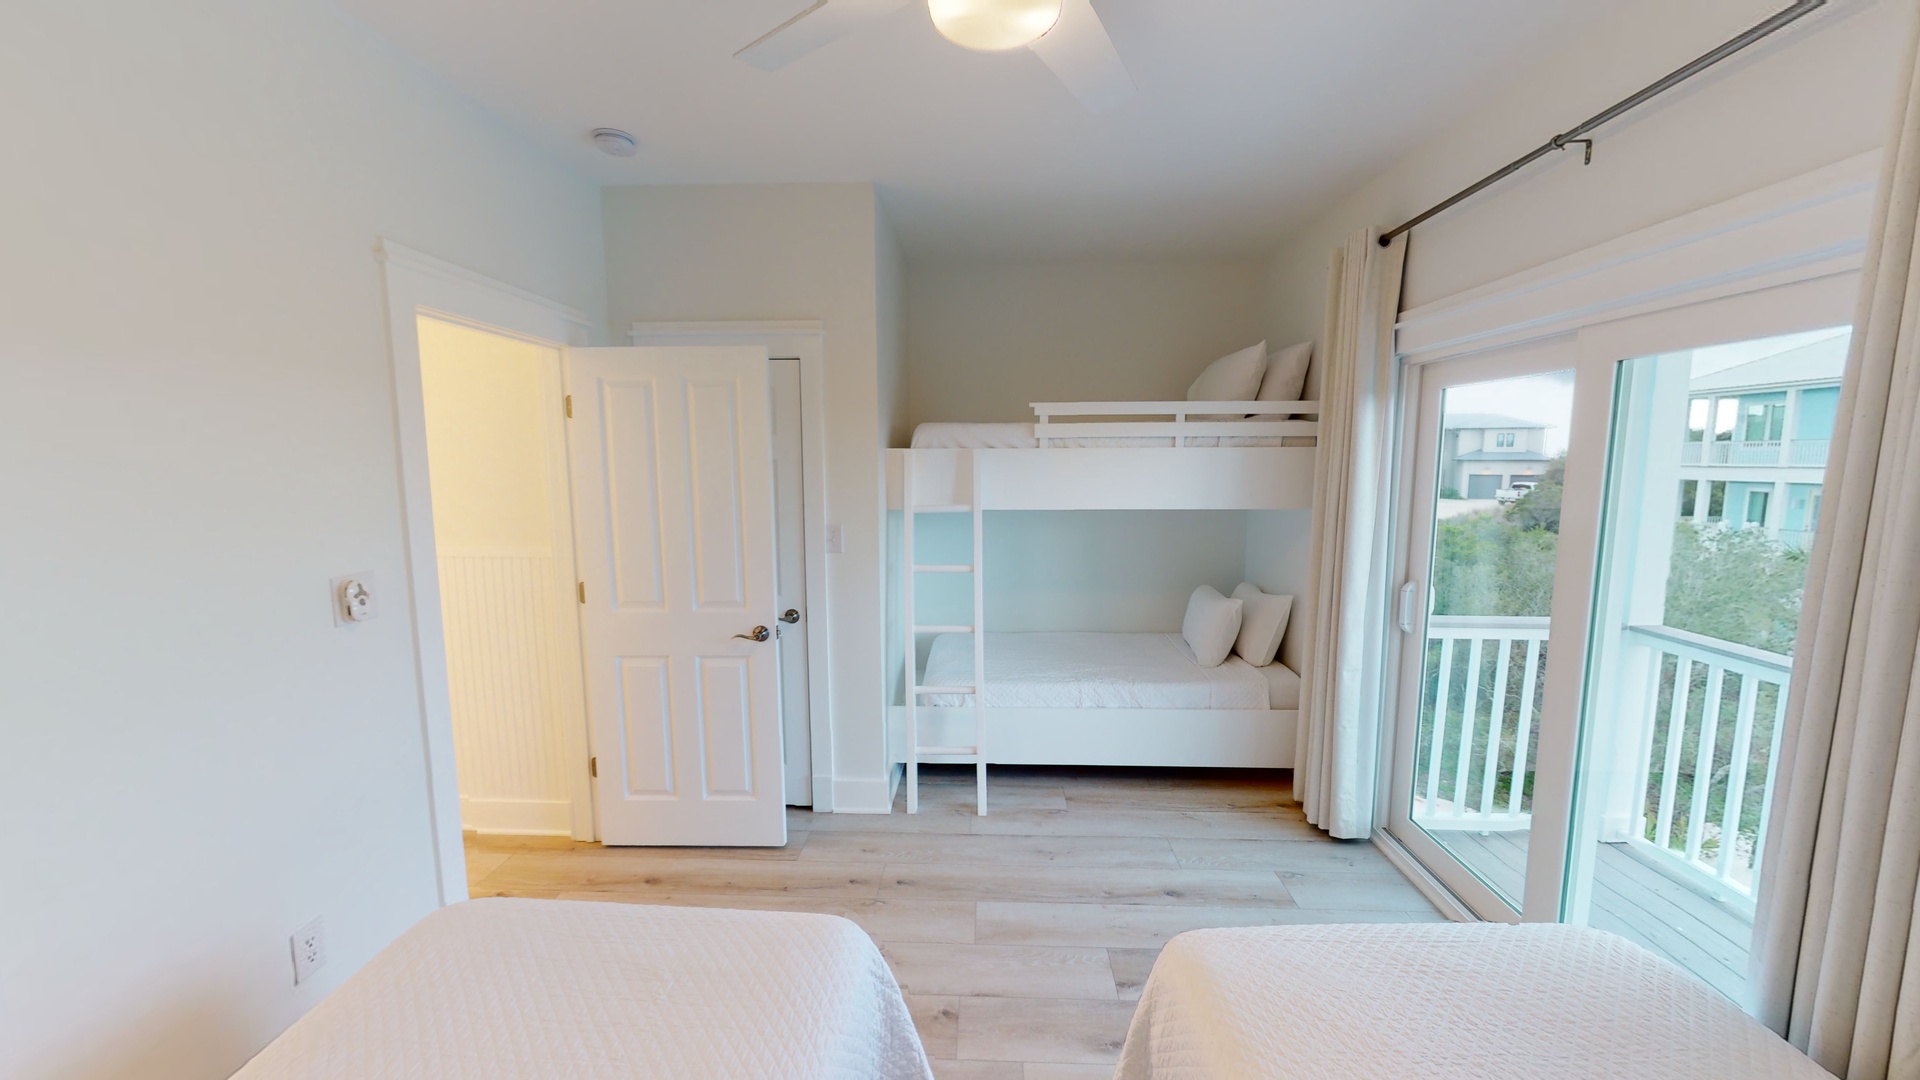 Bedroom 5 comes with 2 twin beds and twin built-in bunks